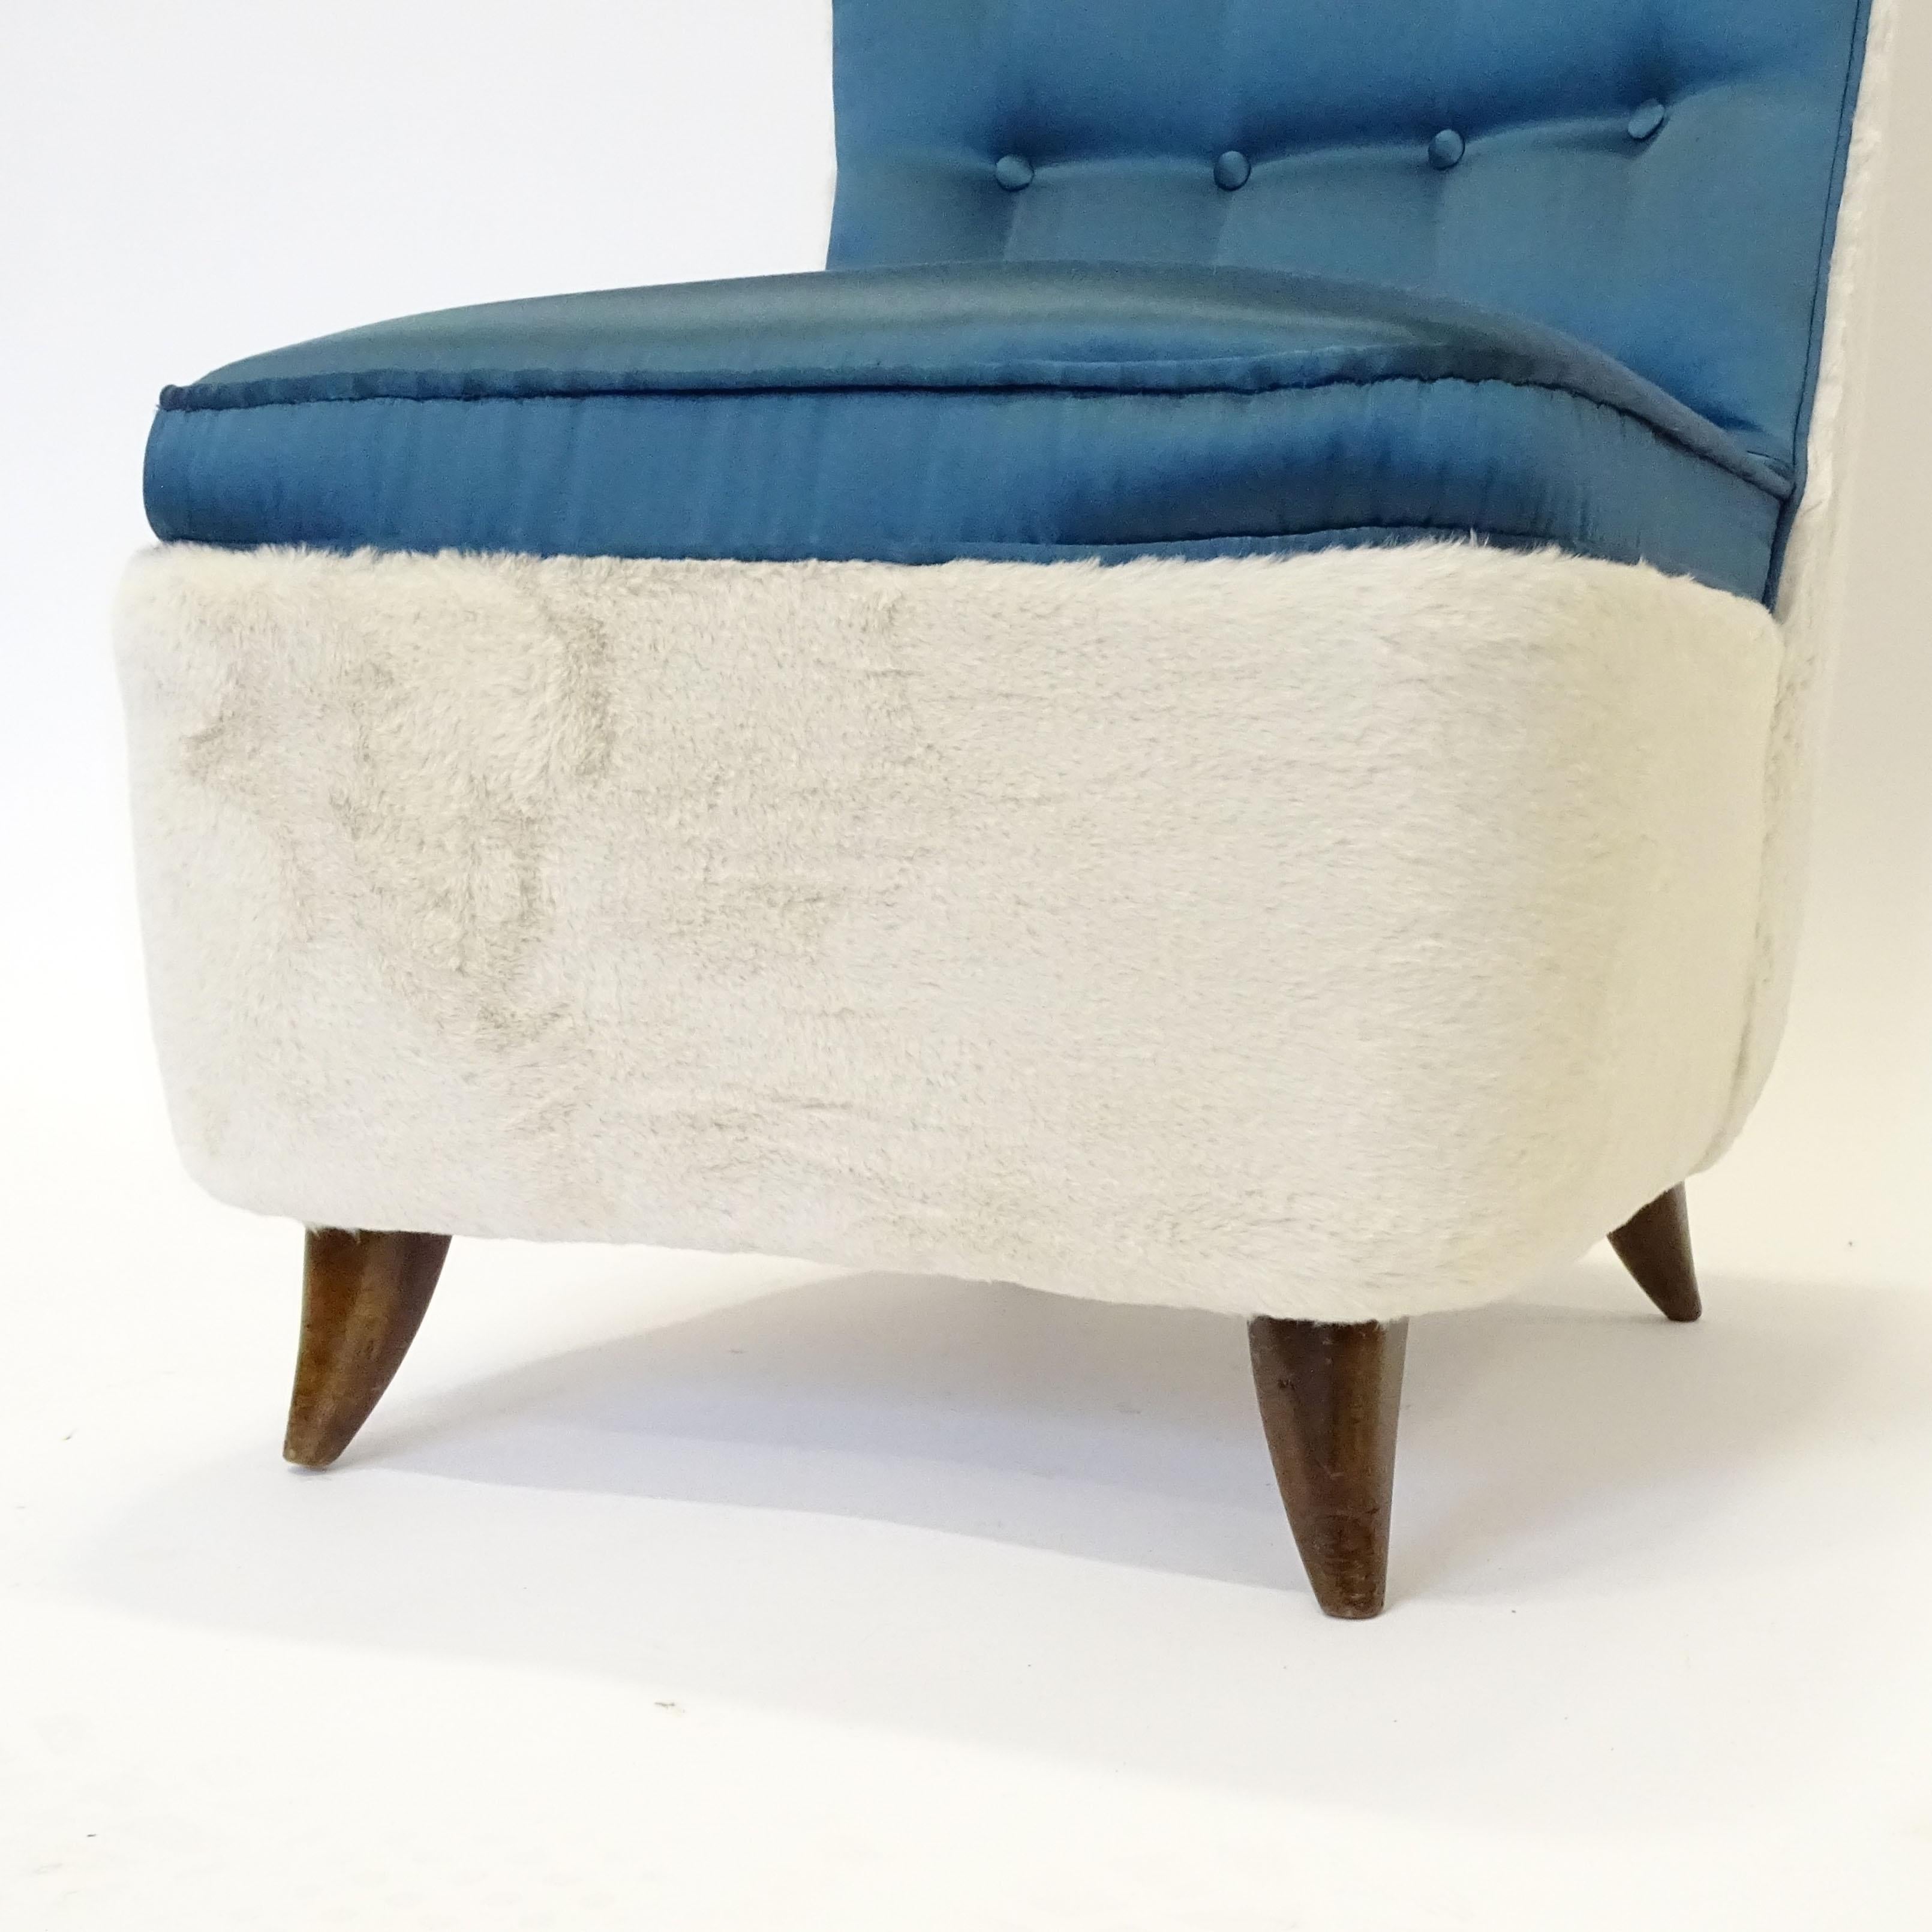 Cesare Lacca Slipper Chair in Faux fur and Dark Blue Satin, Italy, 1950s For Sale 3